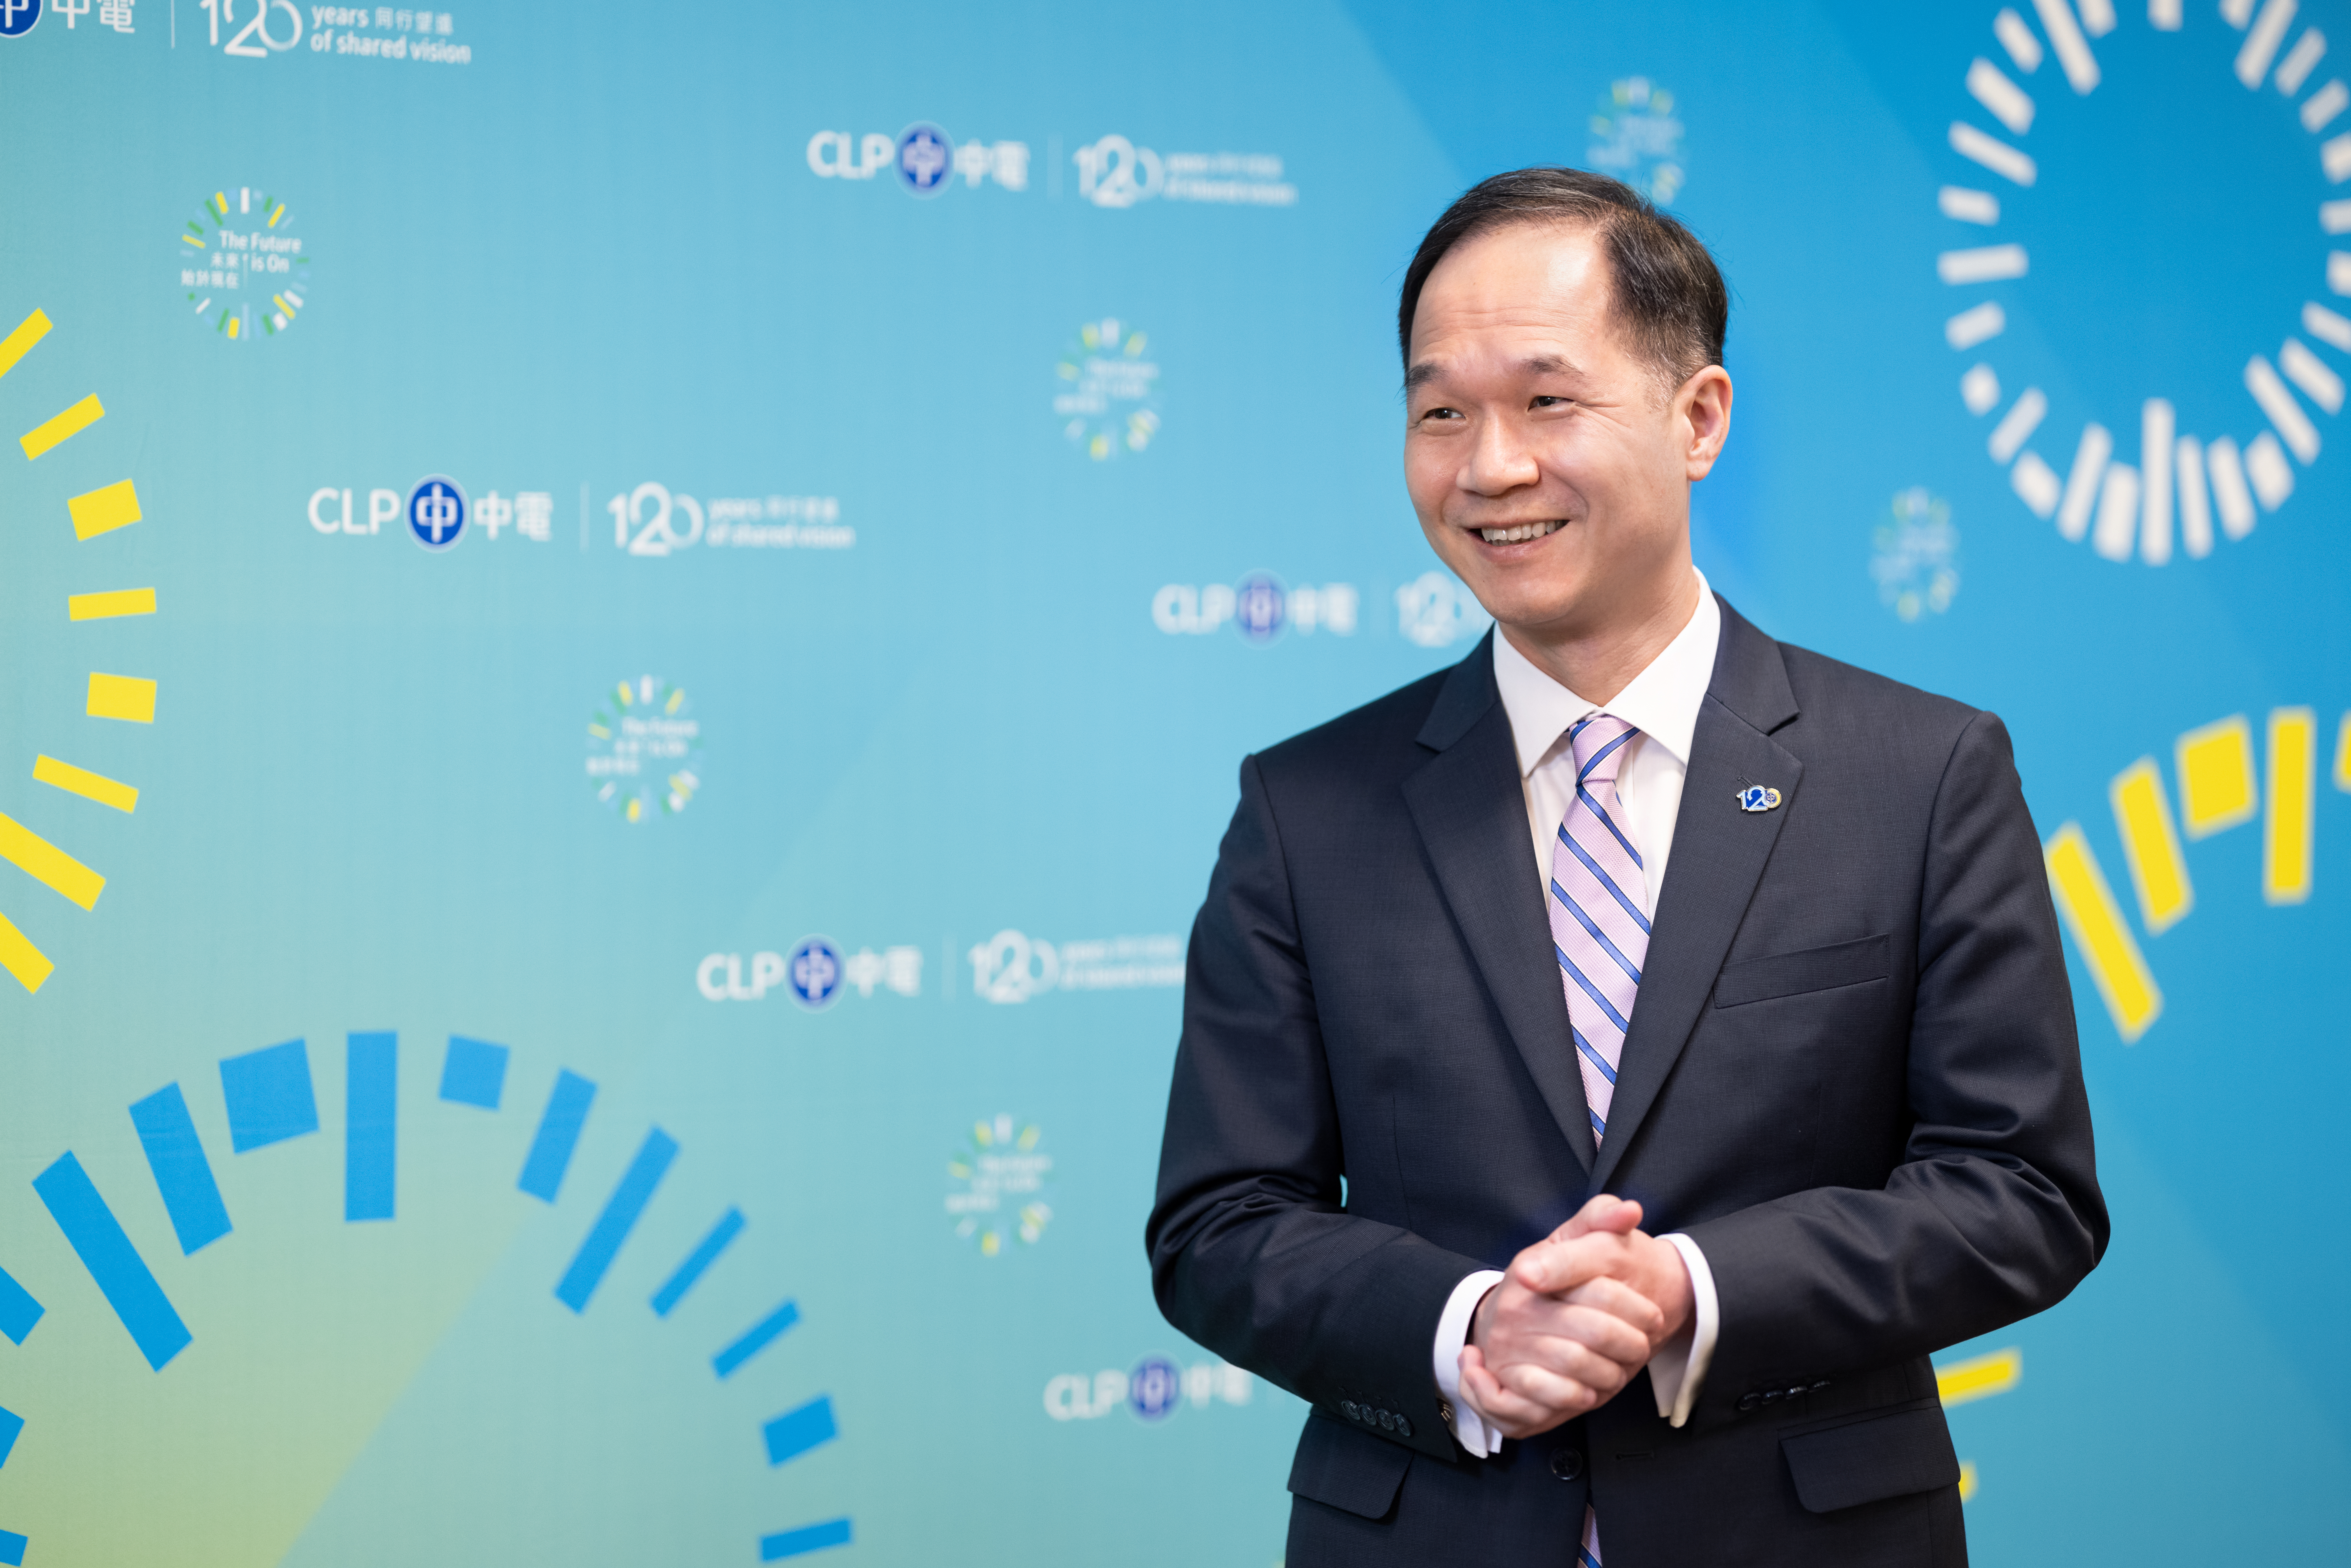 Chiang’s enthusiasm for serving CLP and Hong Kong has only increased with time.